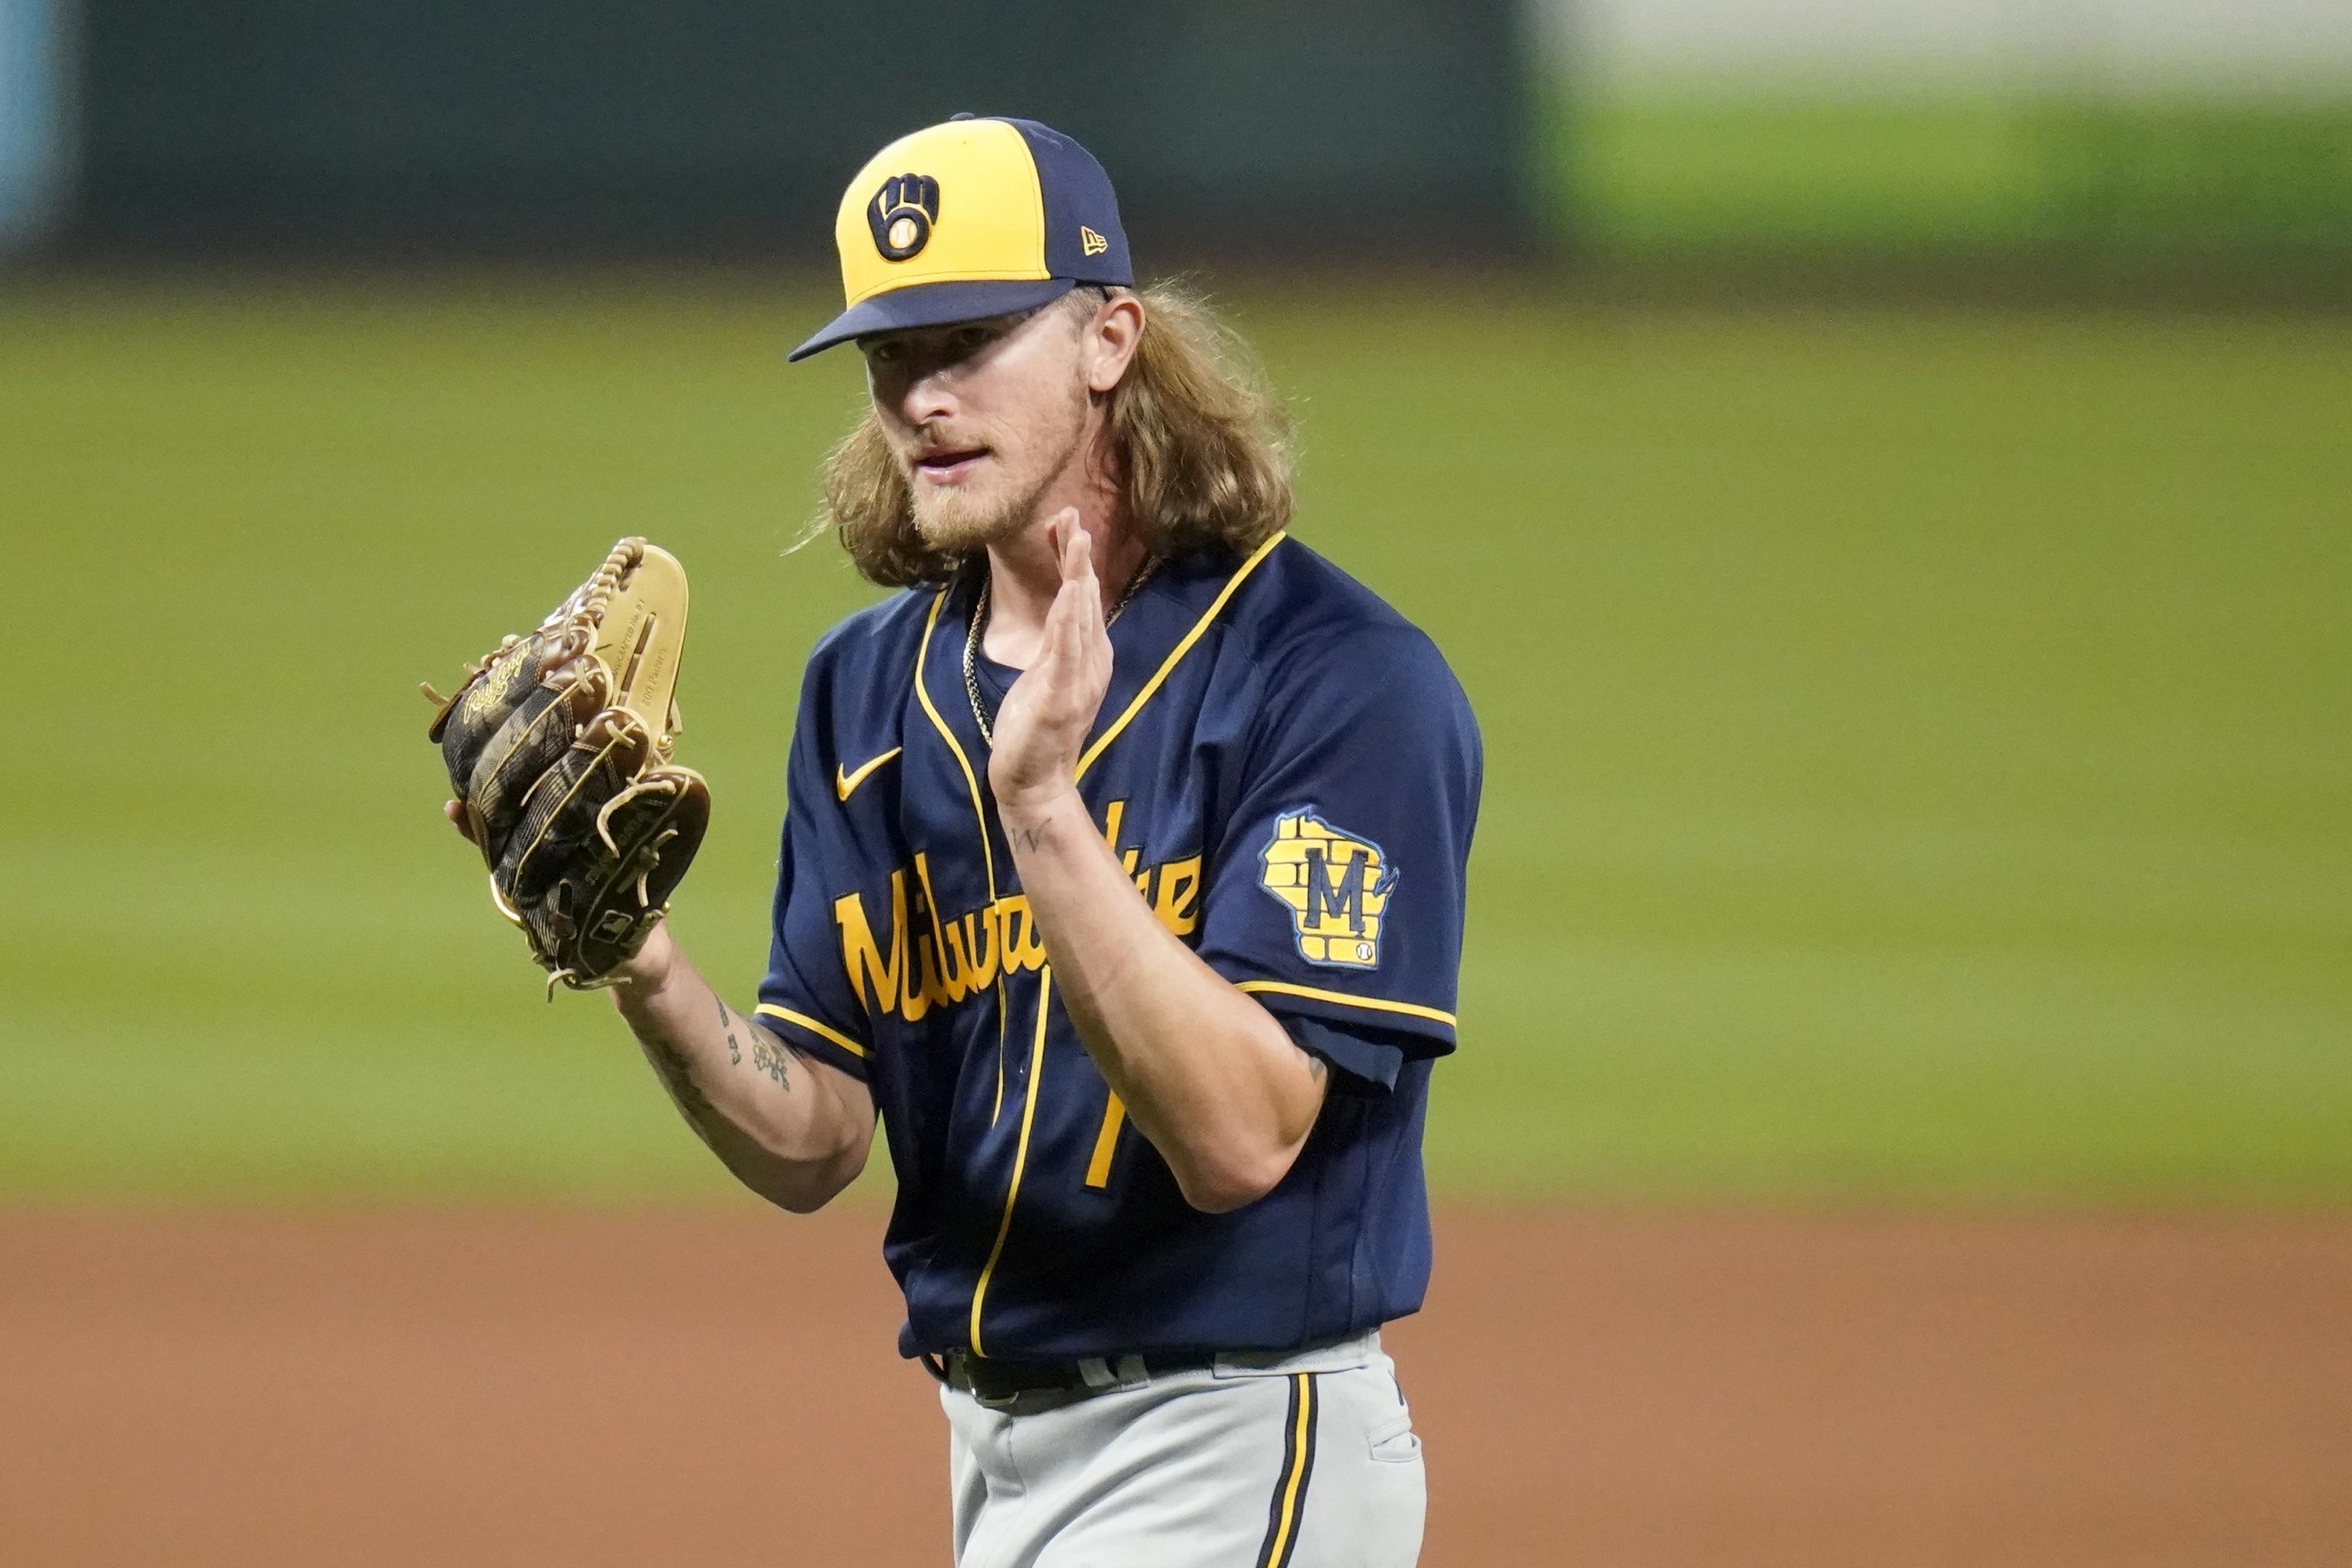 Get to Know: Q&A with Brewers reliever Josh Hader